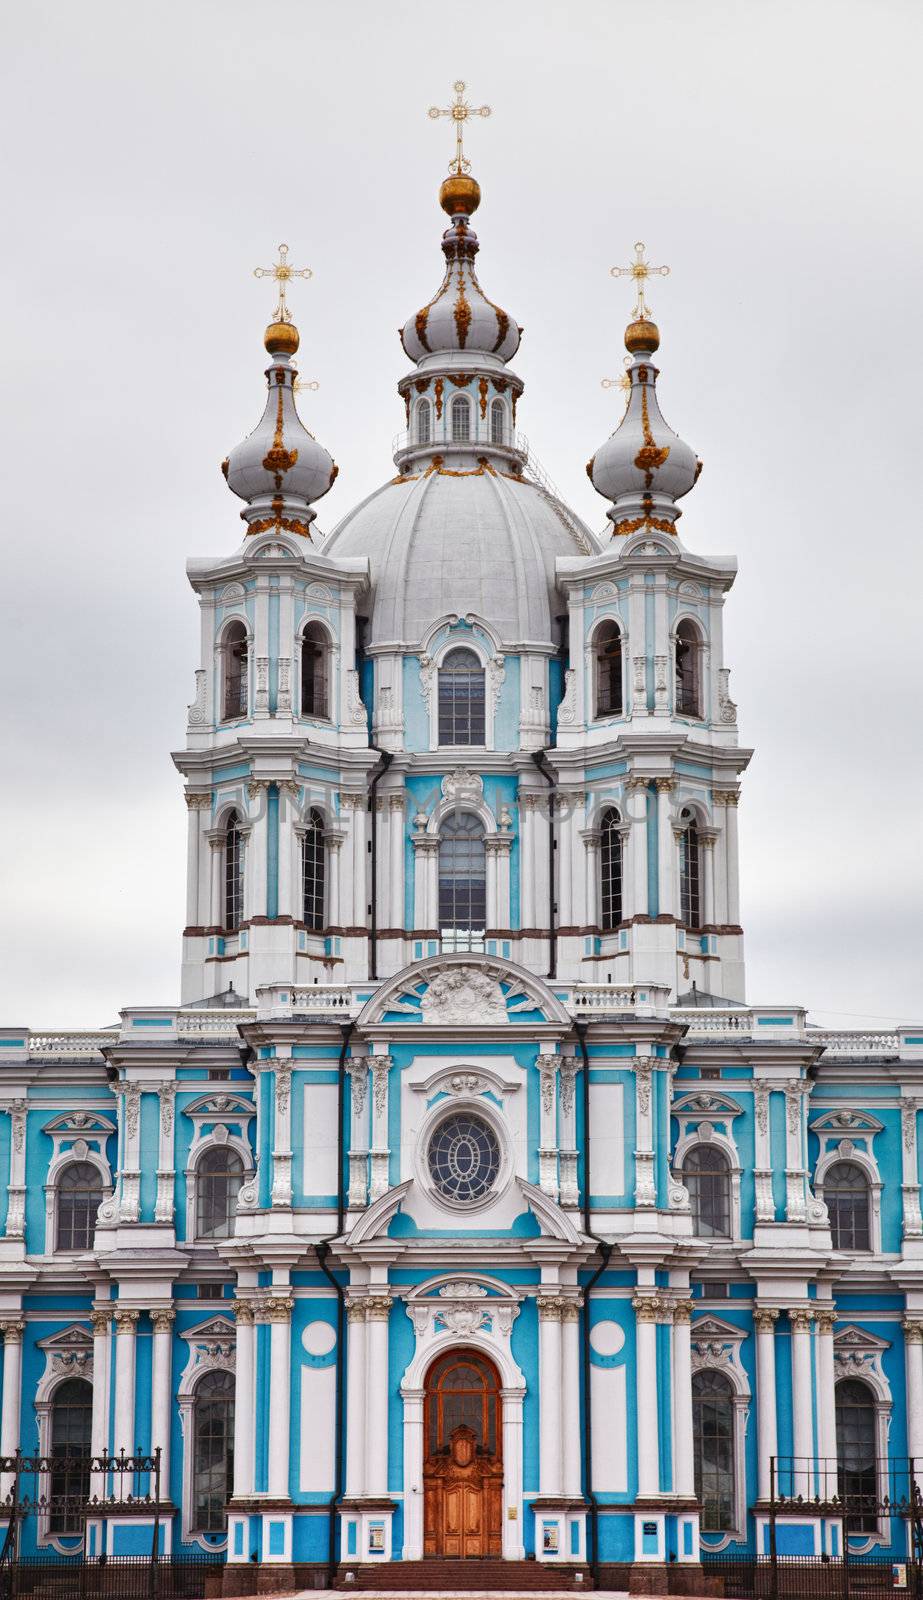 The ancient Russian Orthodox church in St. Petersburg